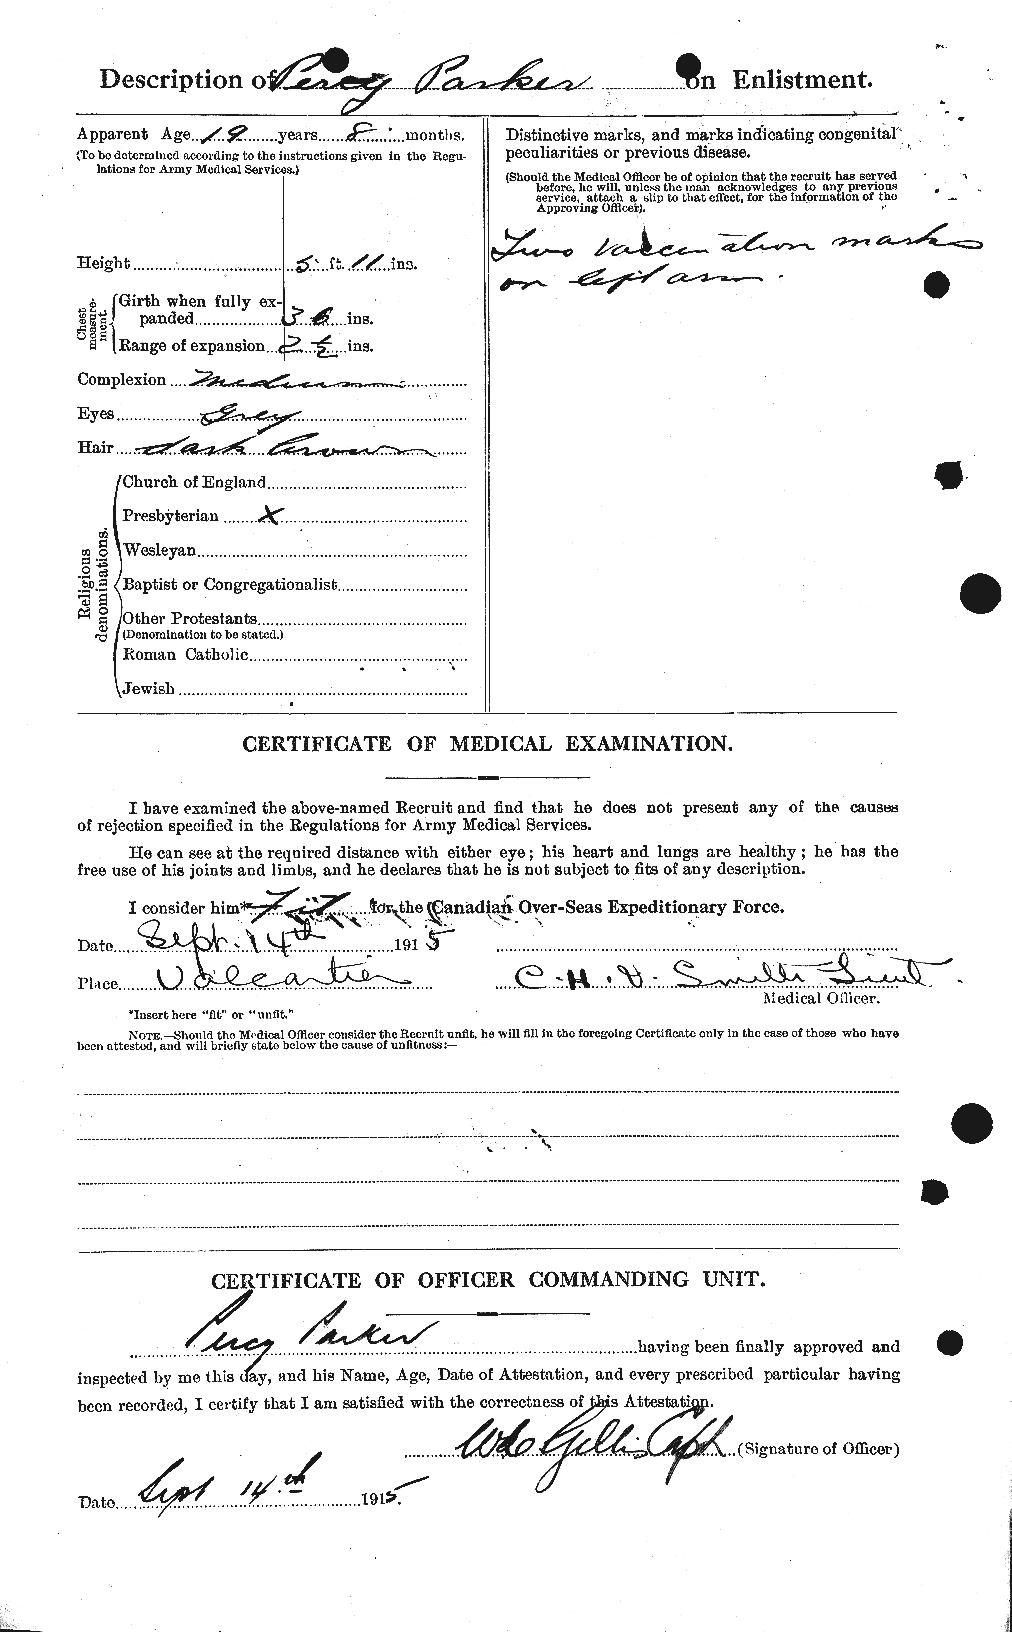 Personnel Records of the First World War - CEF 565563b